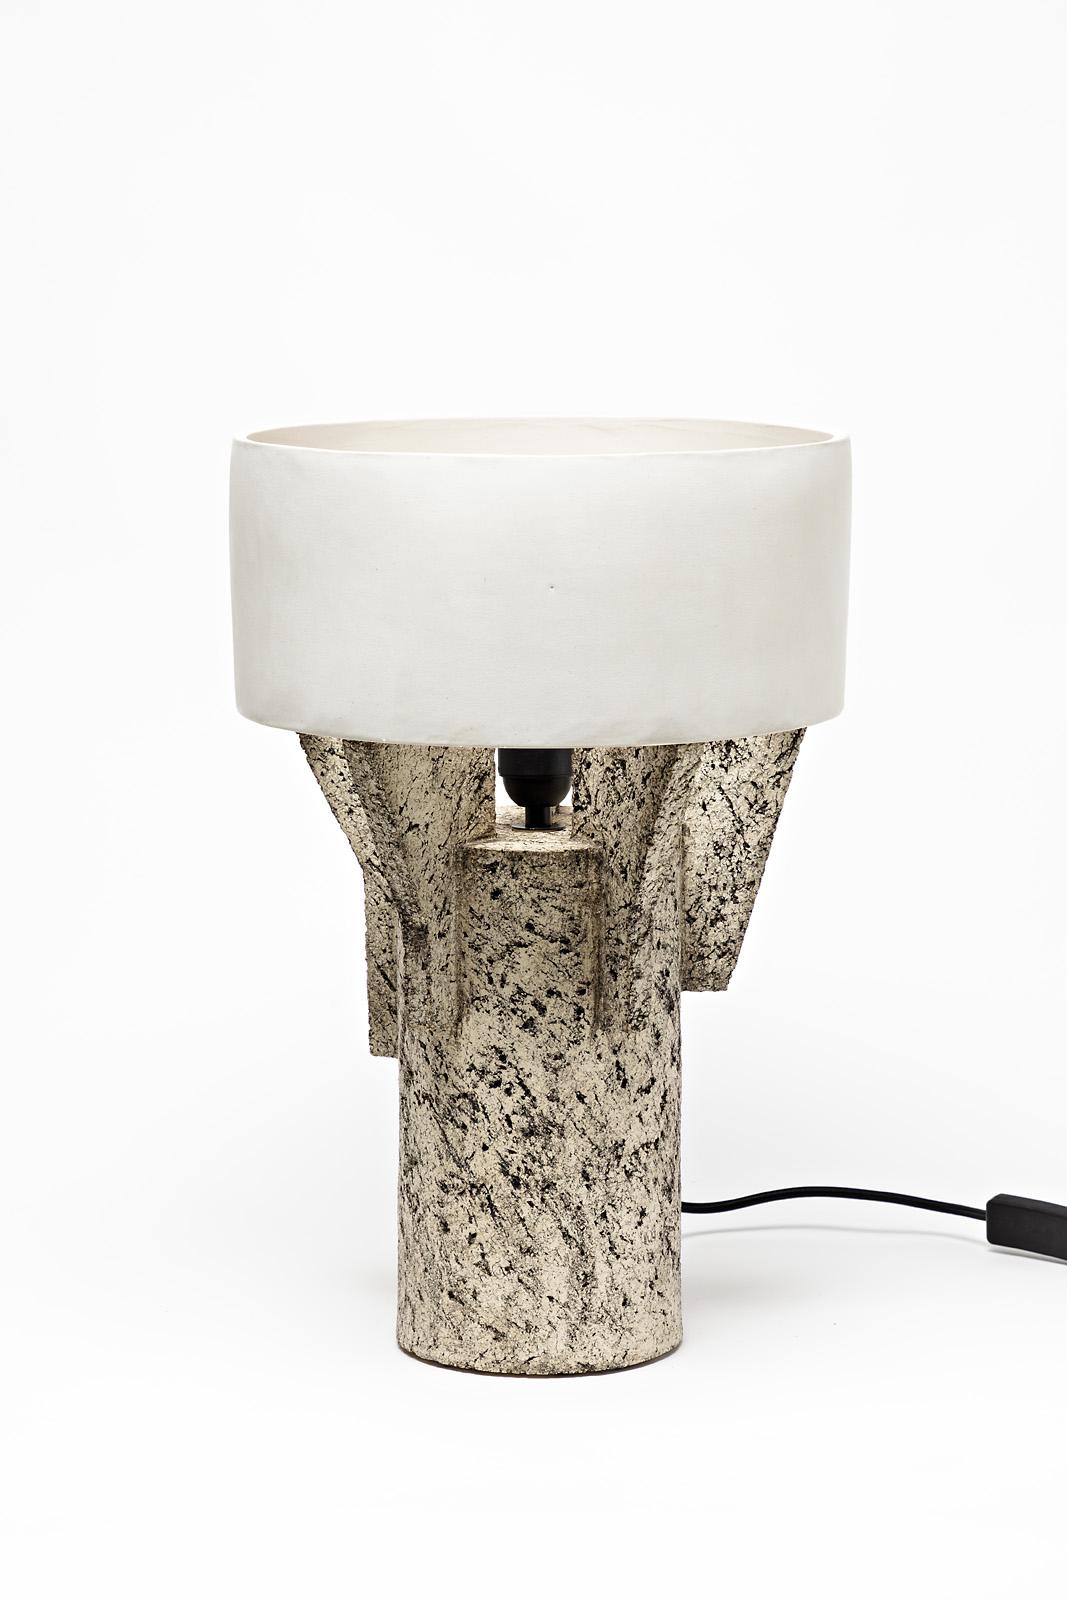 A ceramic table lamp by Denis Castaing with white glaze decoration.
The base and the lamp shade are in ceramic.
Sold with a European electrical system.
Perfect original conditions,
2019.
Signed under the base.